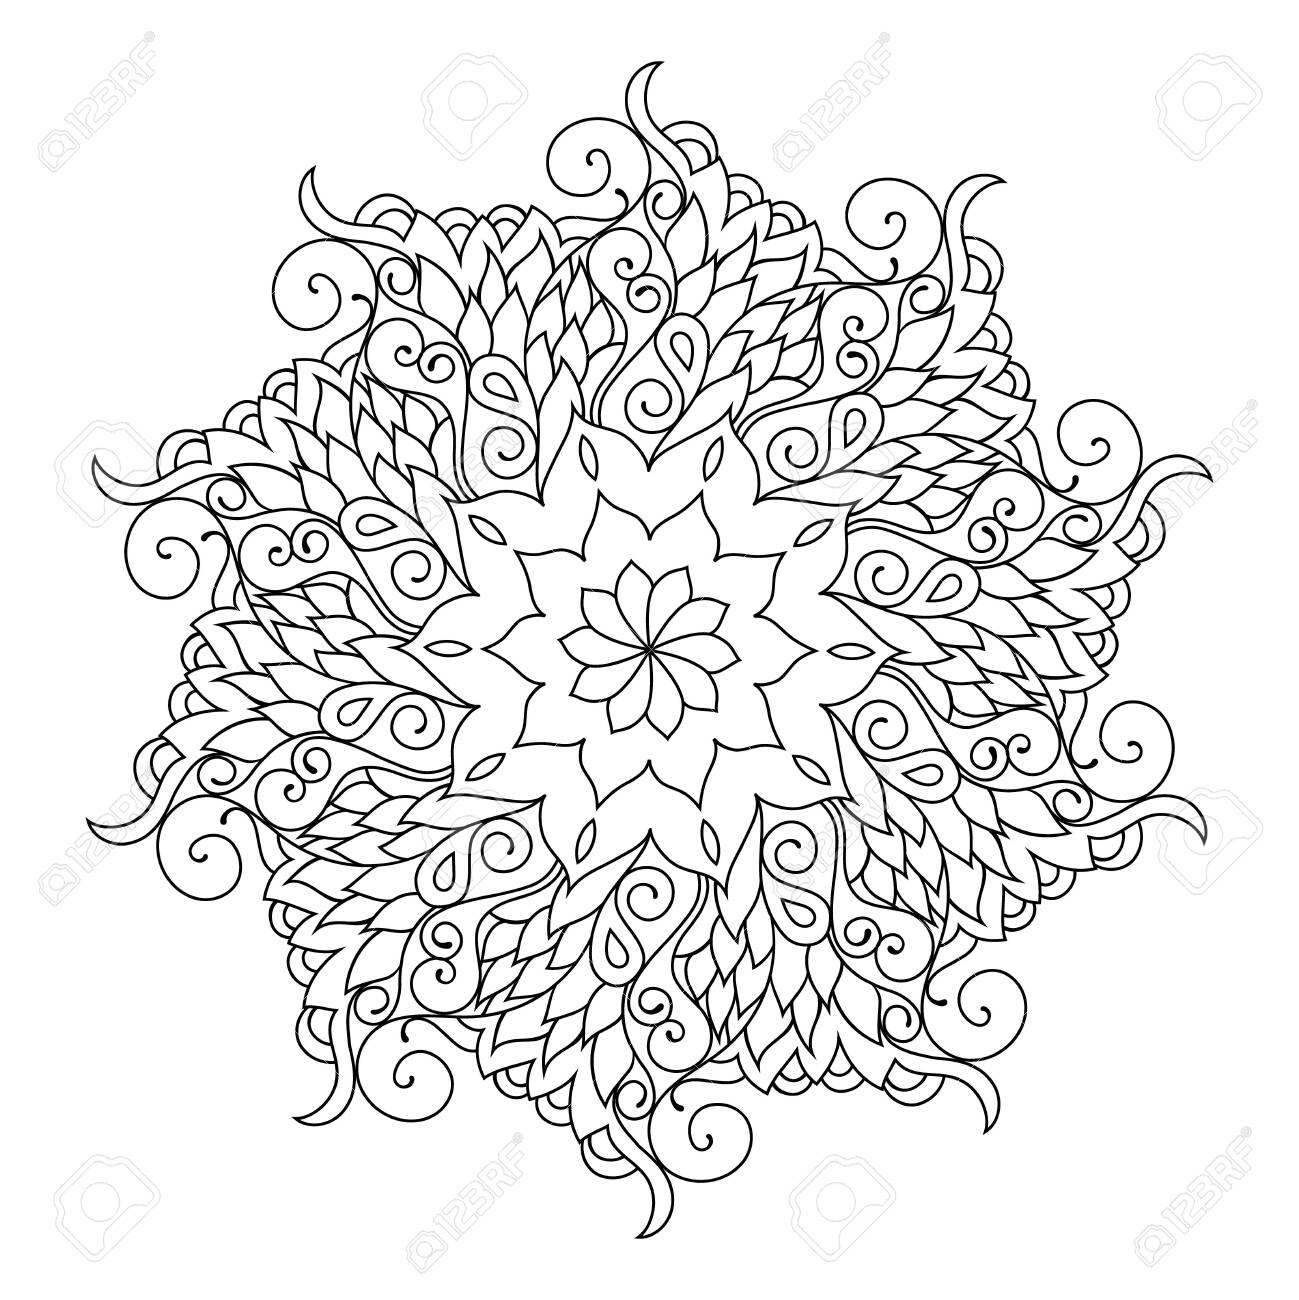 Radial mandala adult coloring book page zendoodle circular black and white outline illustration royalty free svg cliparts vectors and stock illustration image